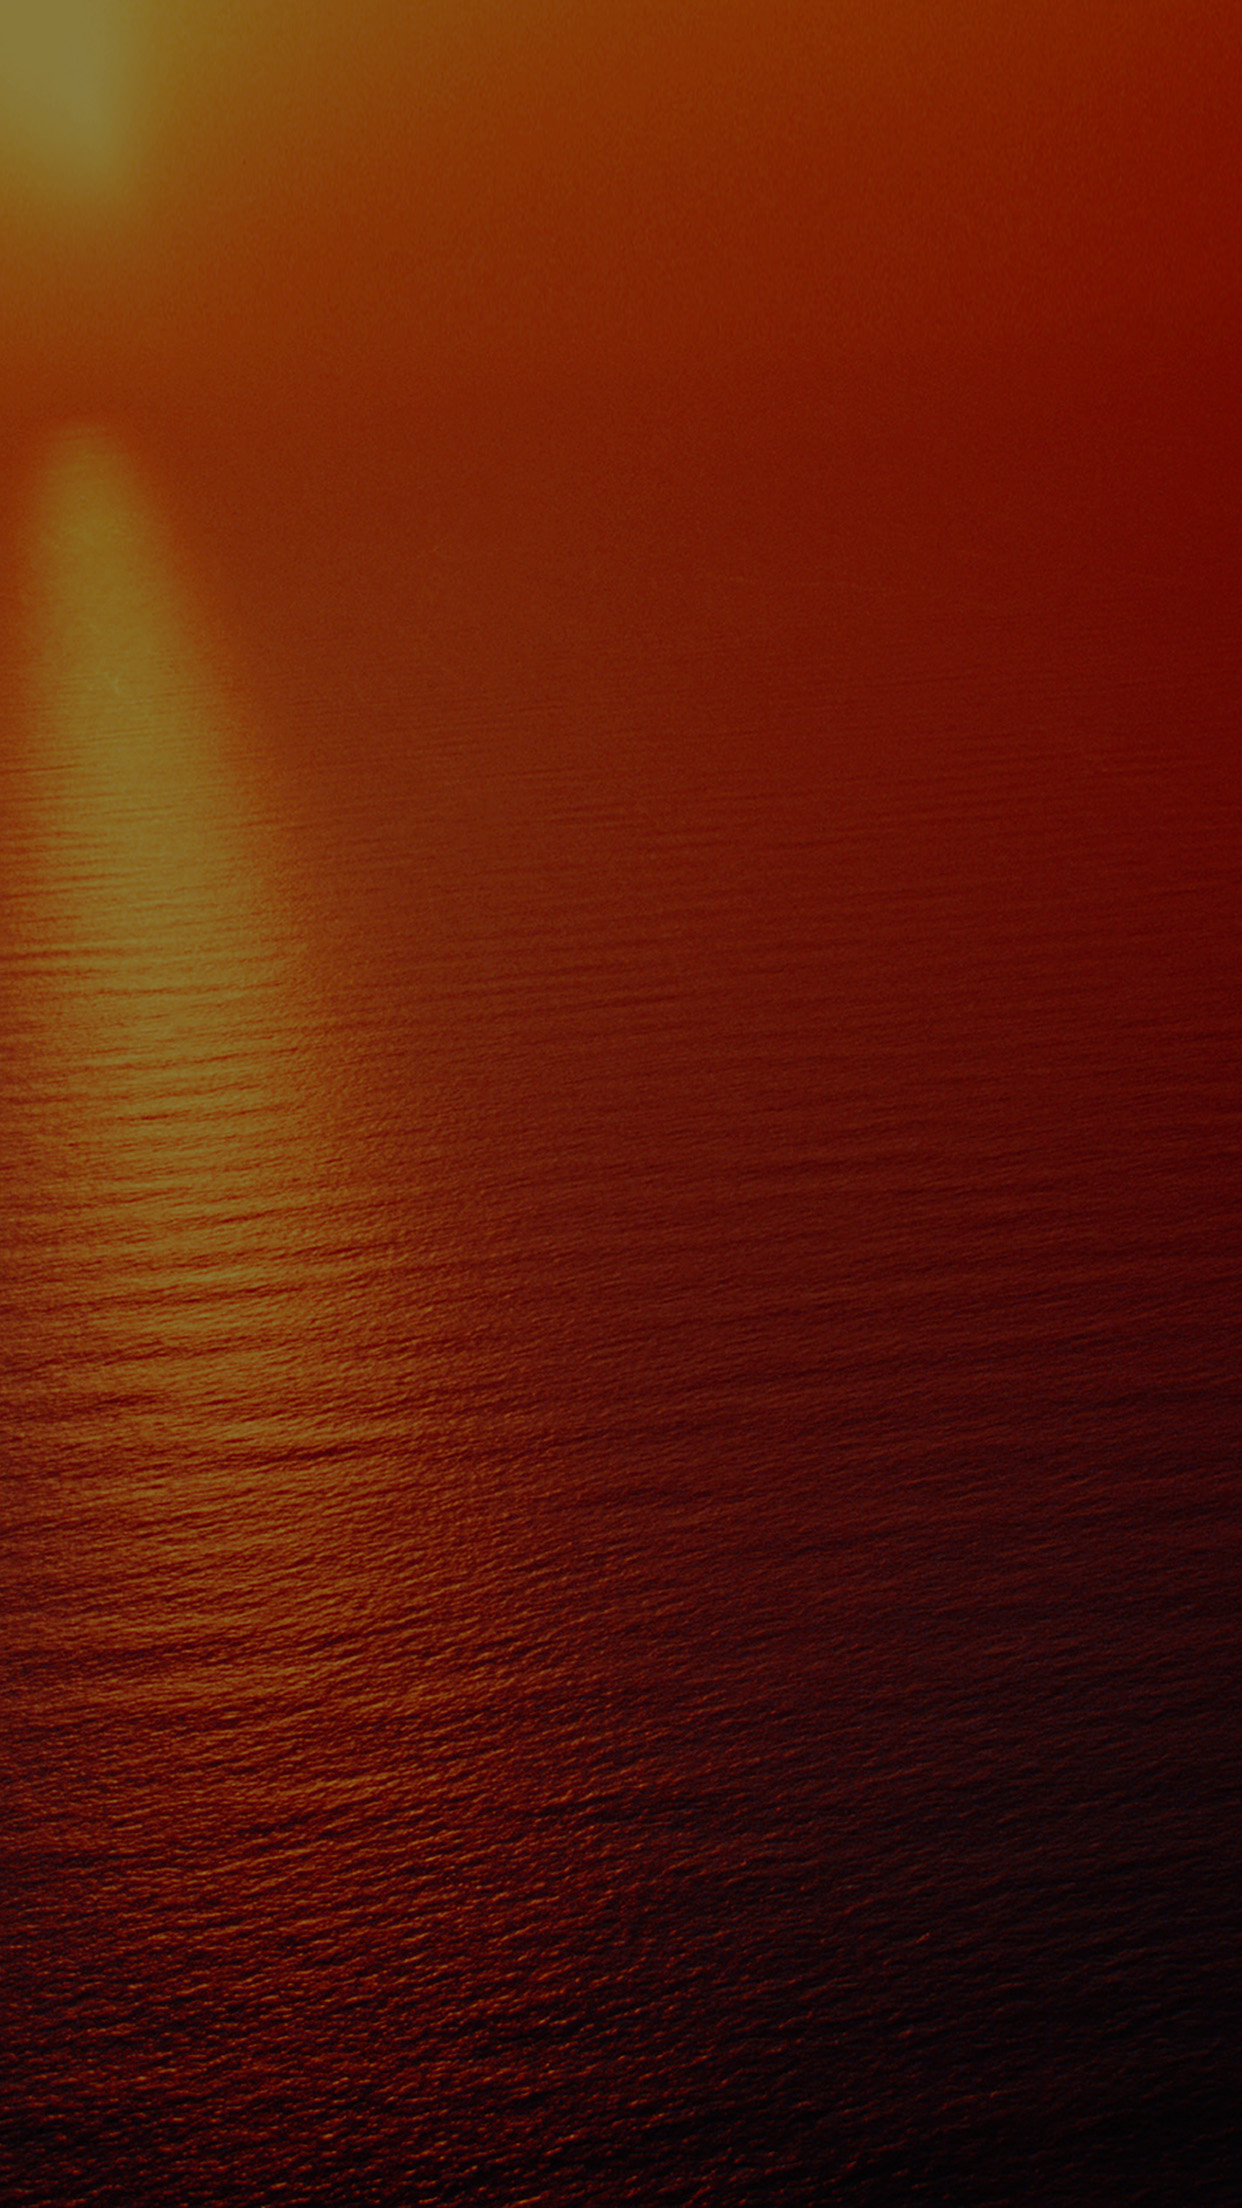 Water Ocean Red Sunset Nature Dark Texture Pattern Android wallpaper